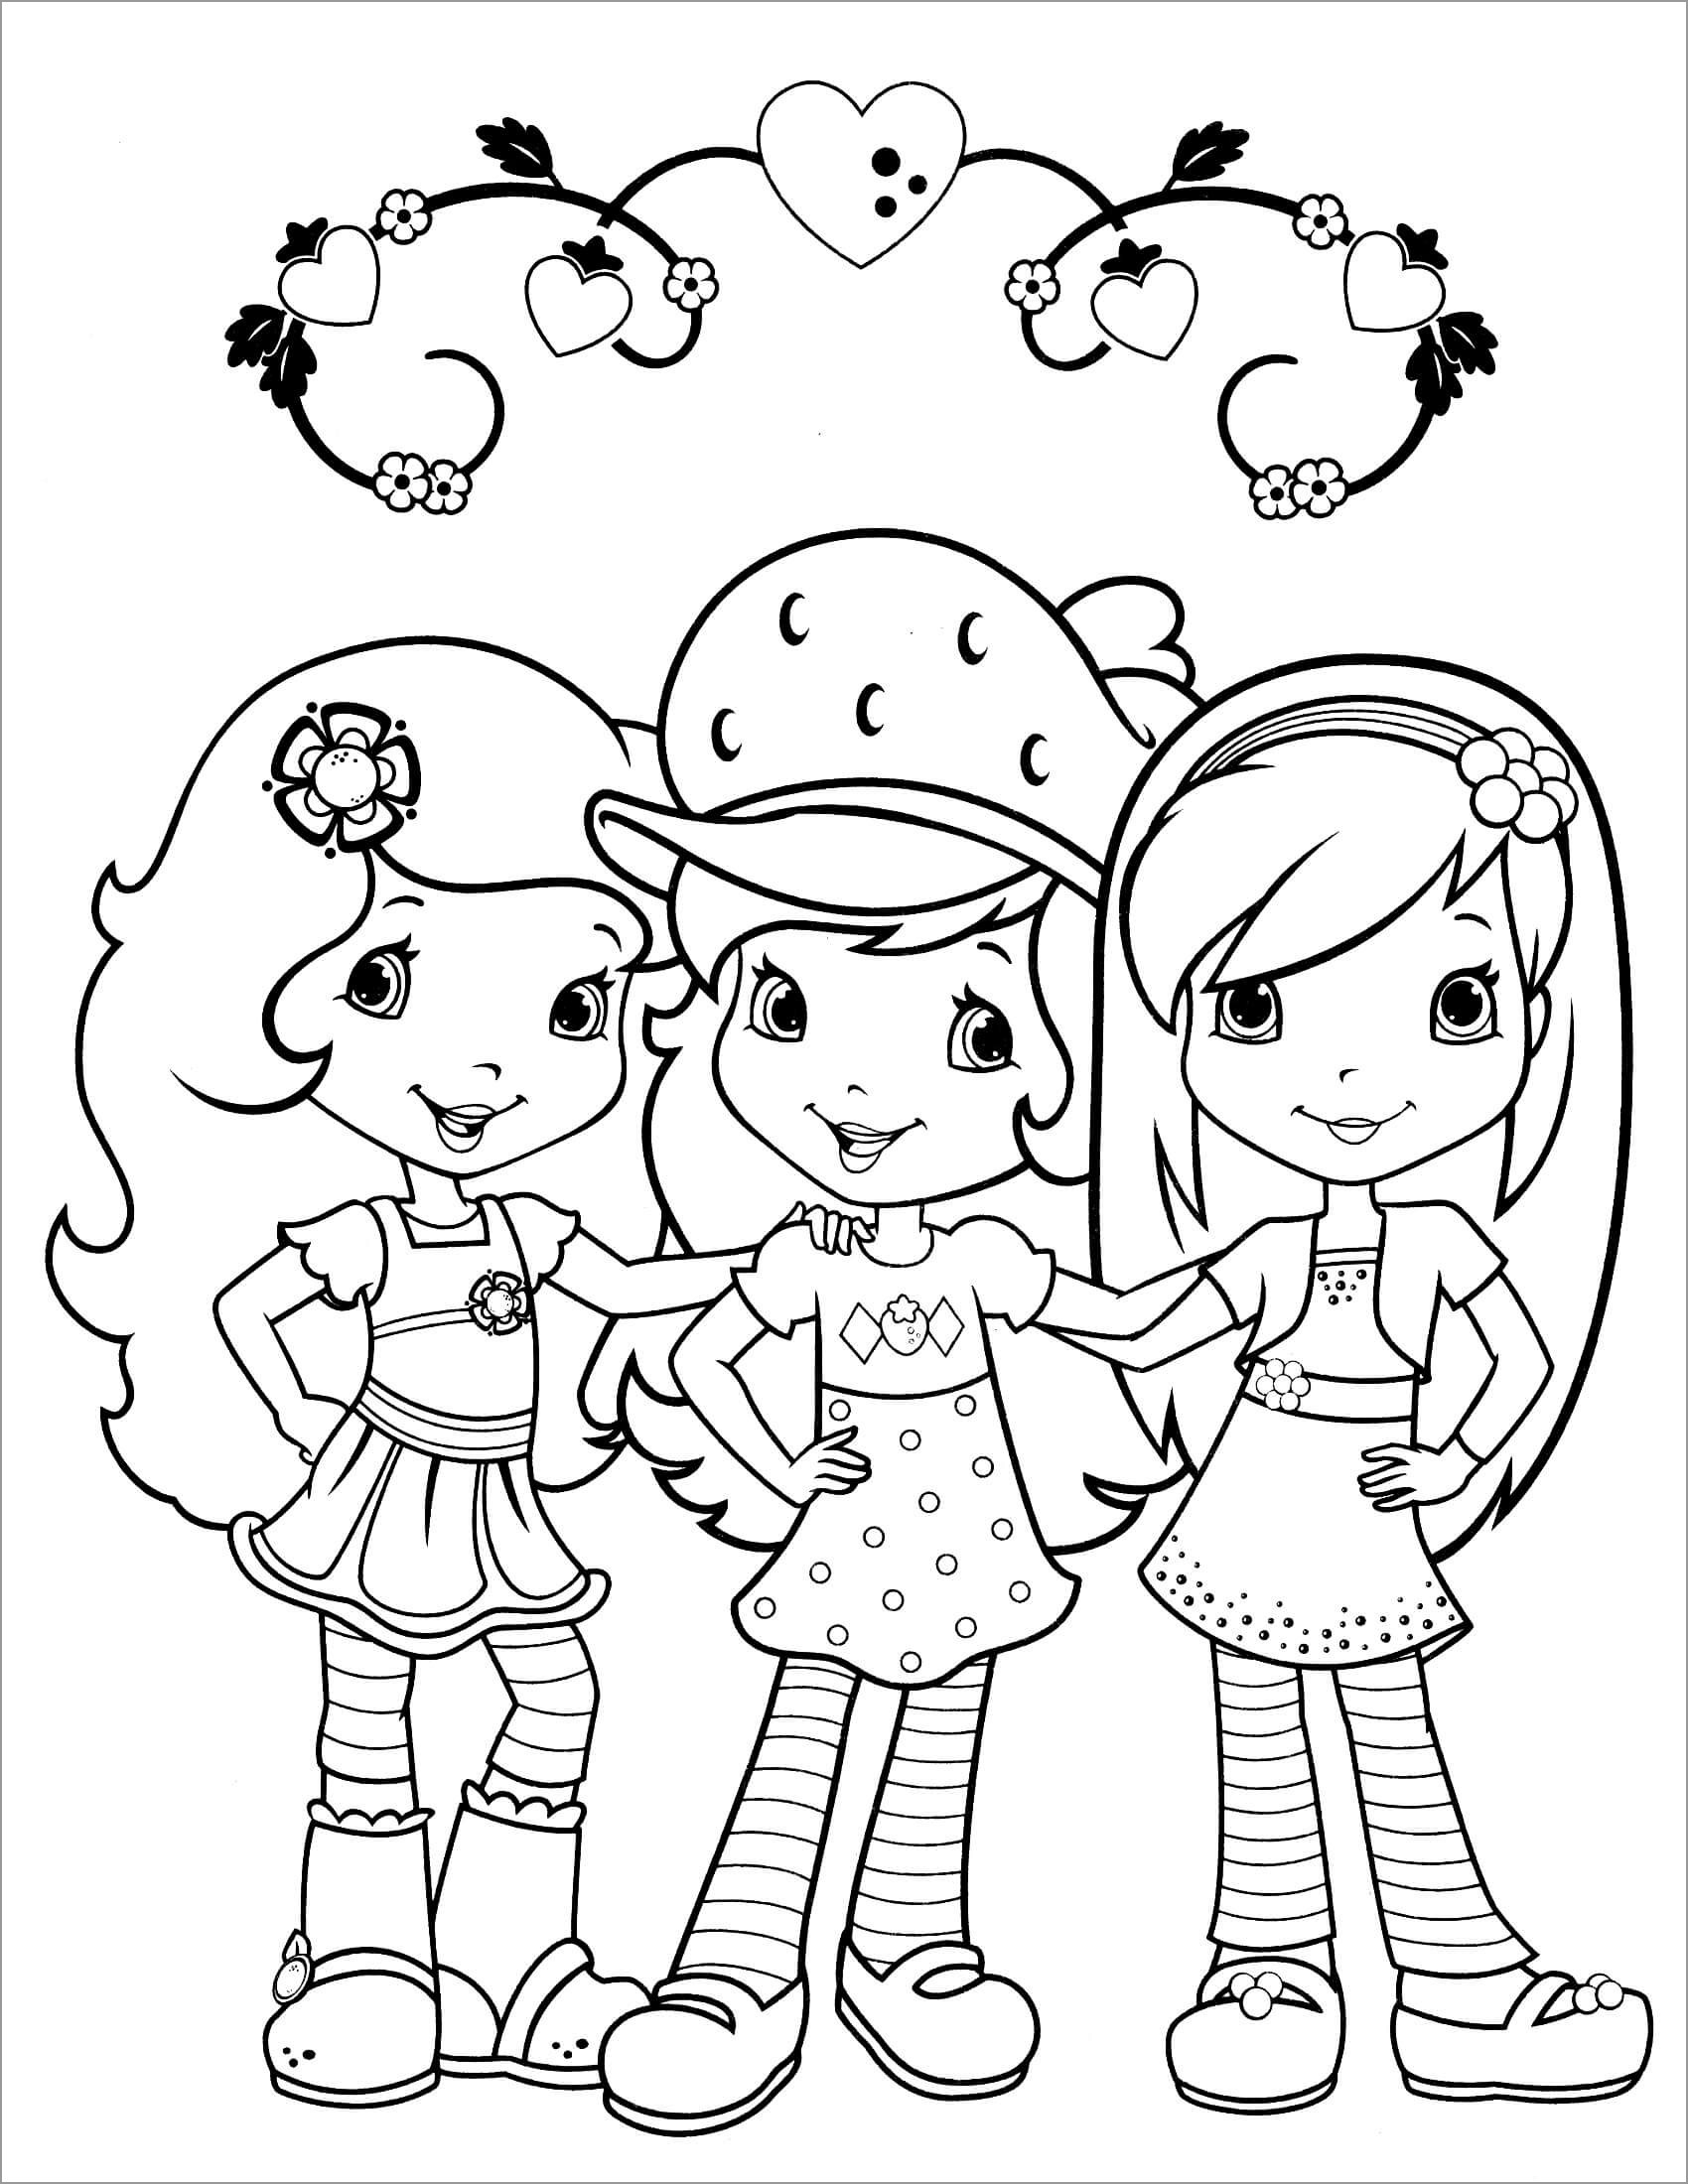 Strawberry Shortcake with Friends Coloring Page